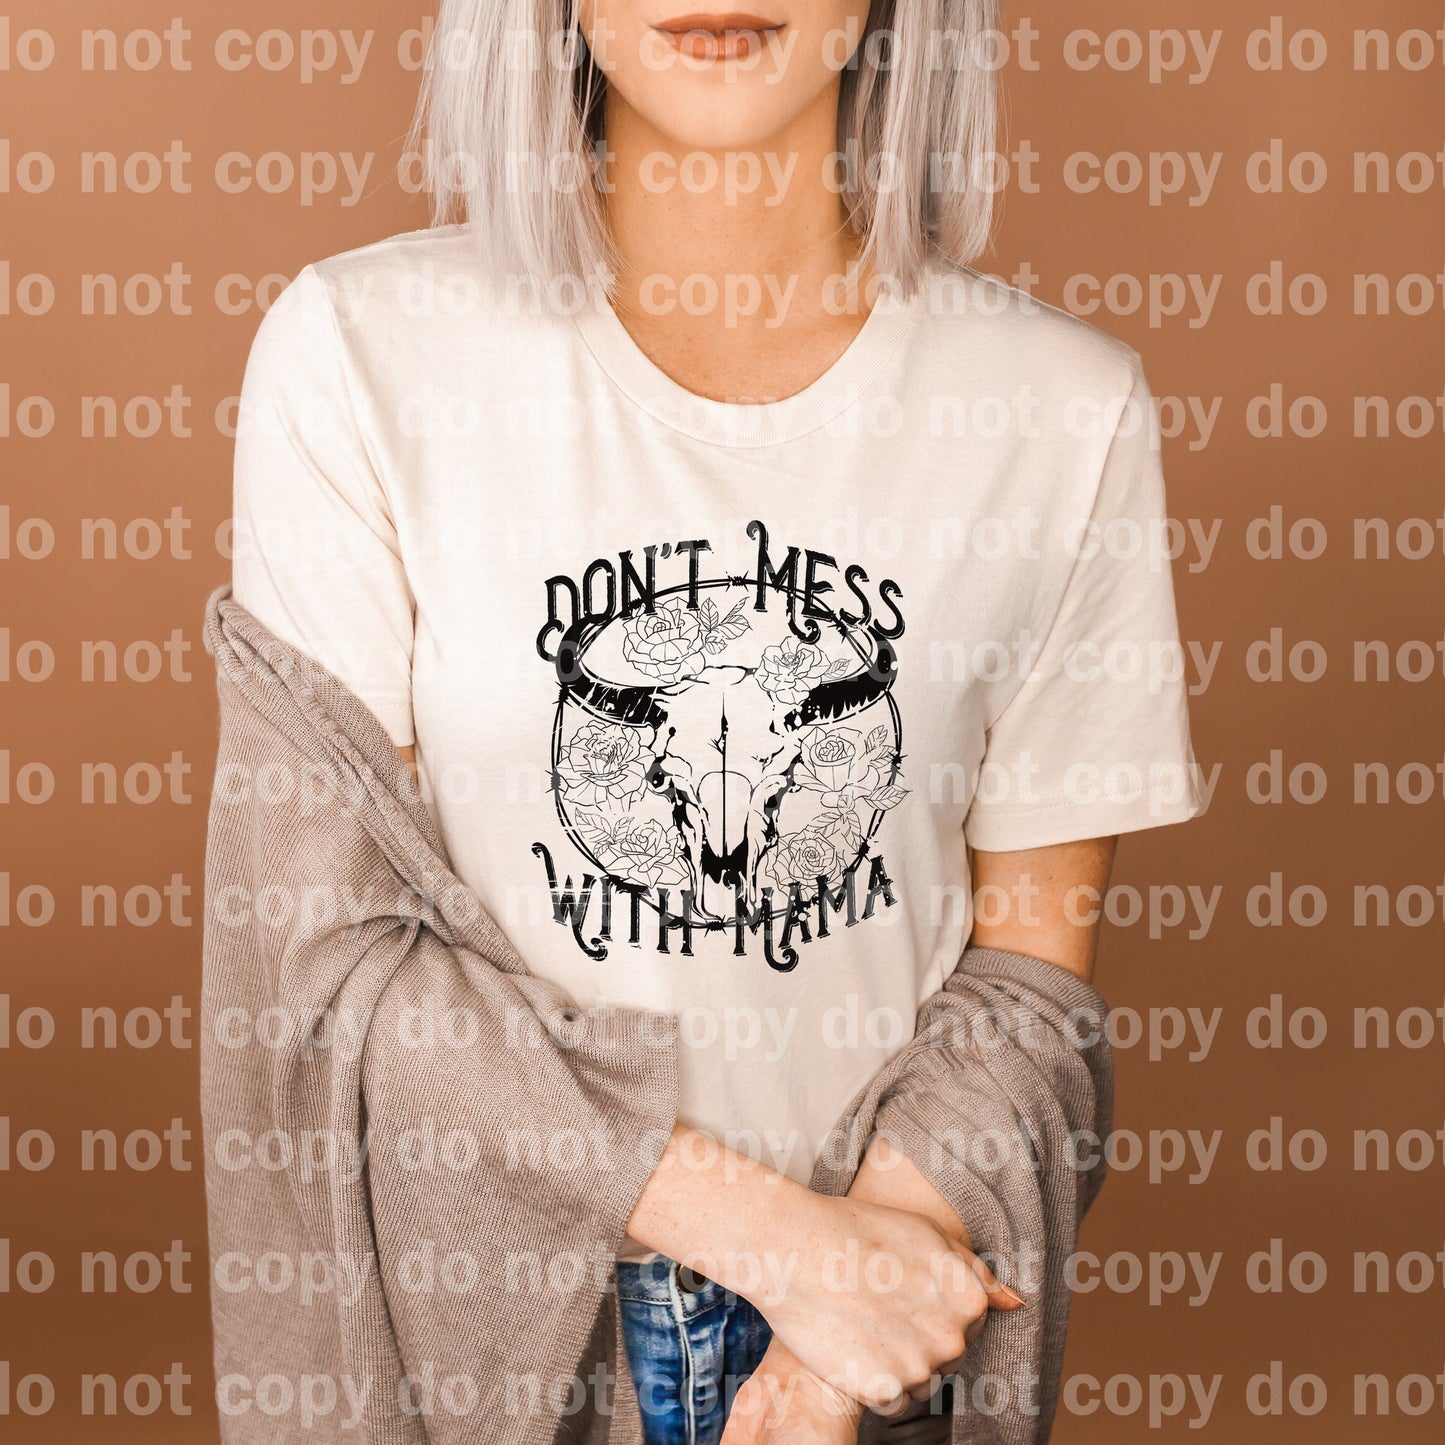 Don't Mess With Mama Full Color/One Color Dream Print or Sublimation Print